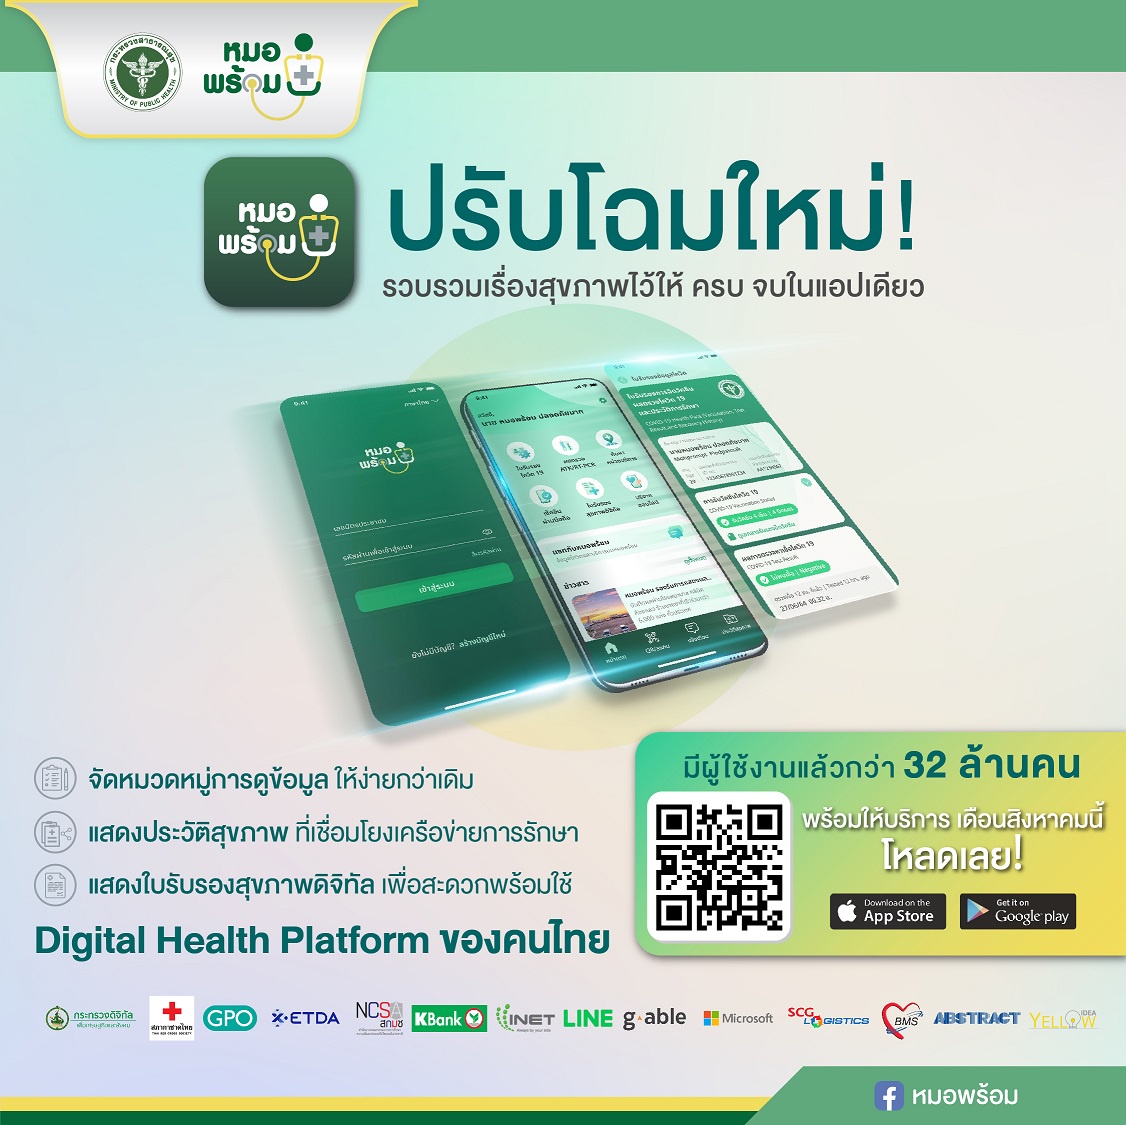 Ministry of Public Health upgrades Moh Prompt application to be Thailand's digital health platform, with 12 new features that respond to users'